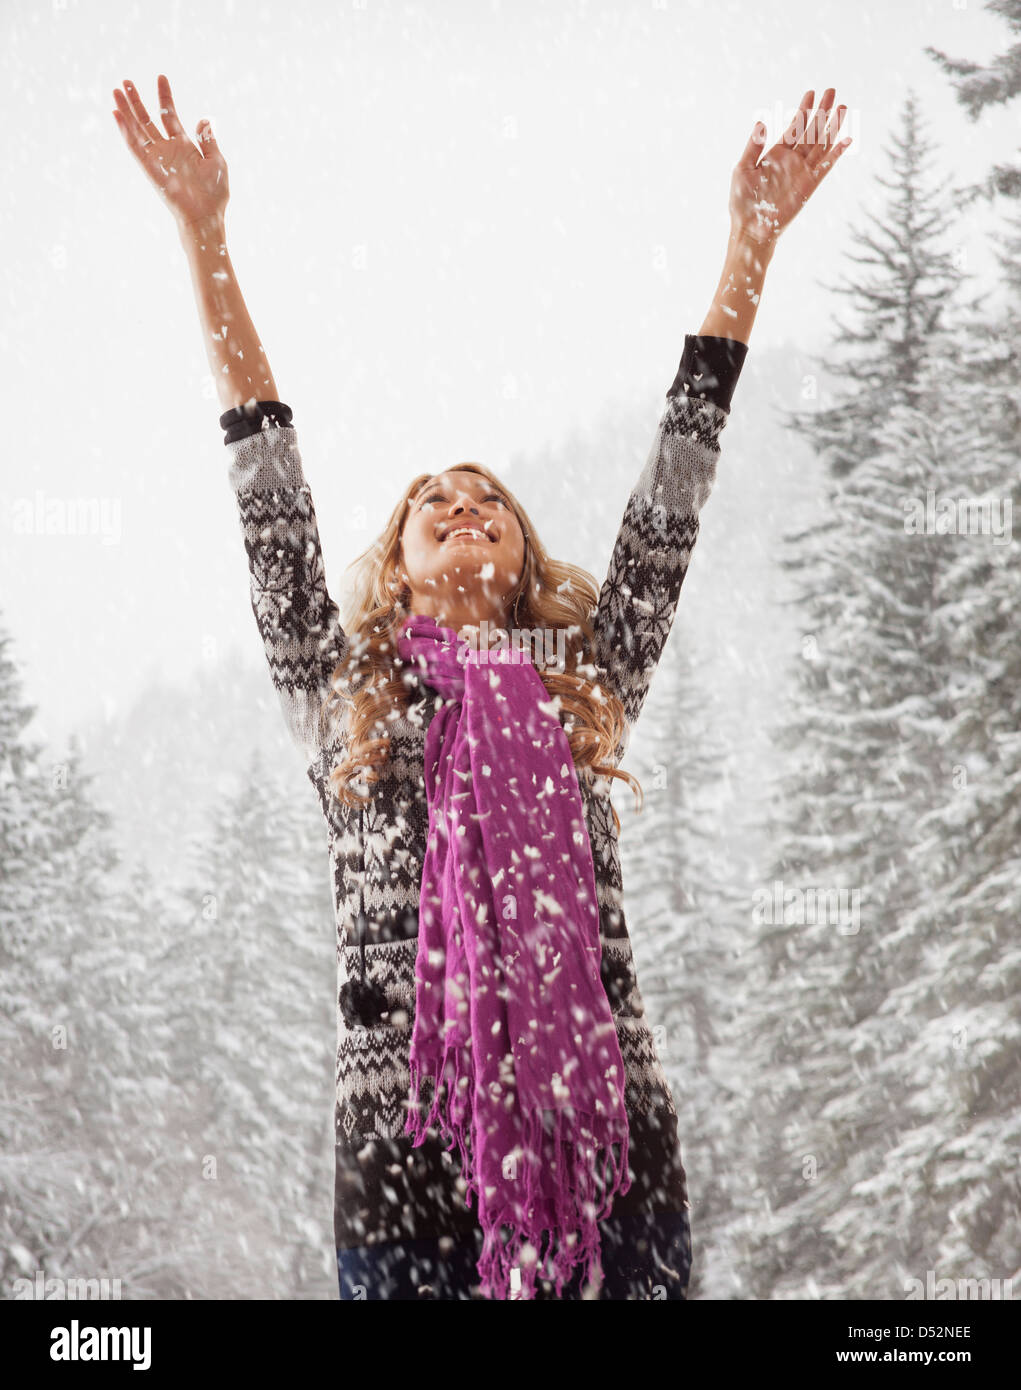 Mixed race woman playing in snow Stock Photo